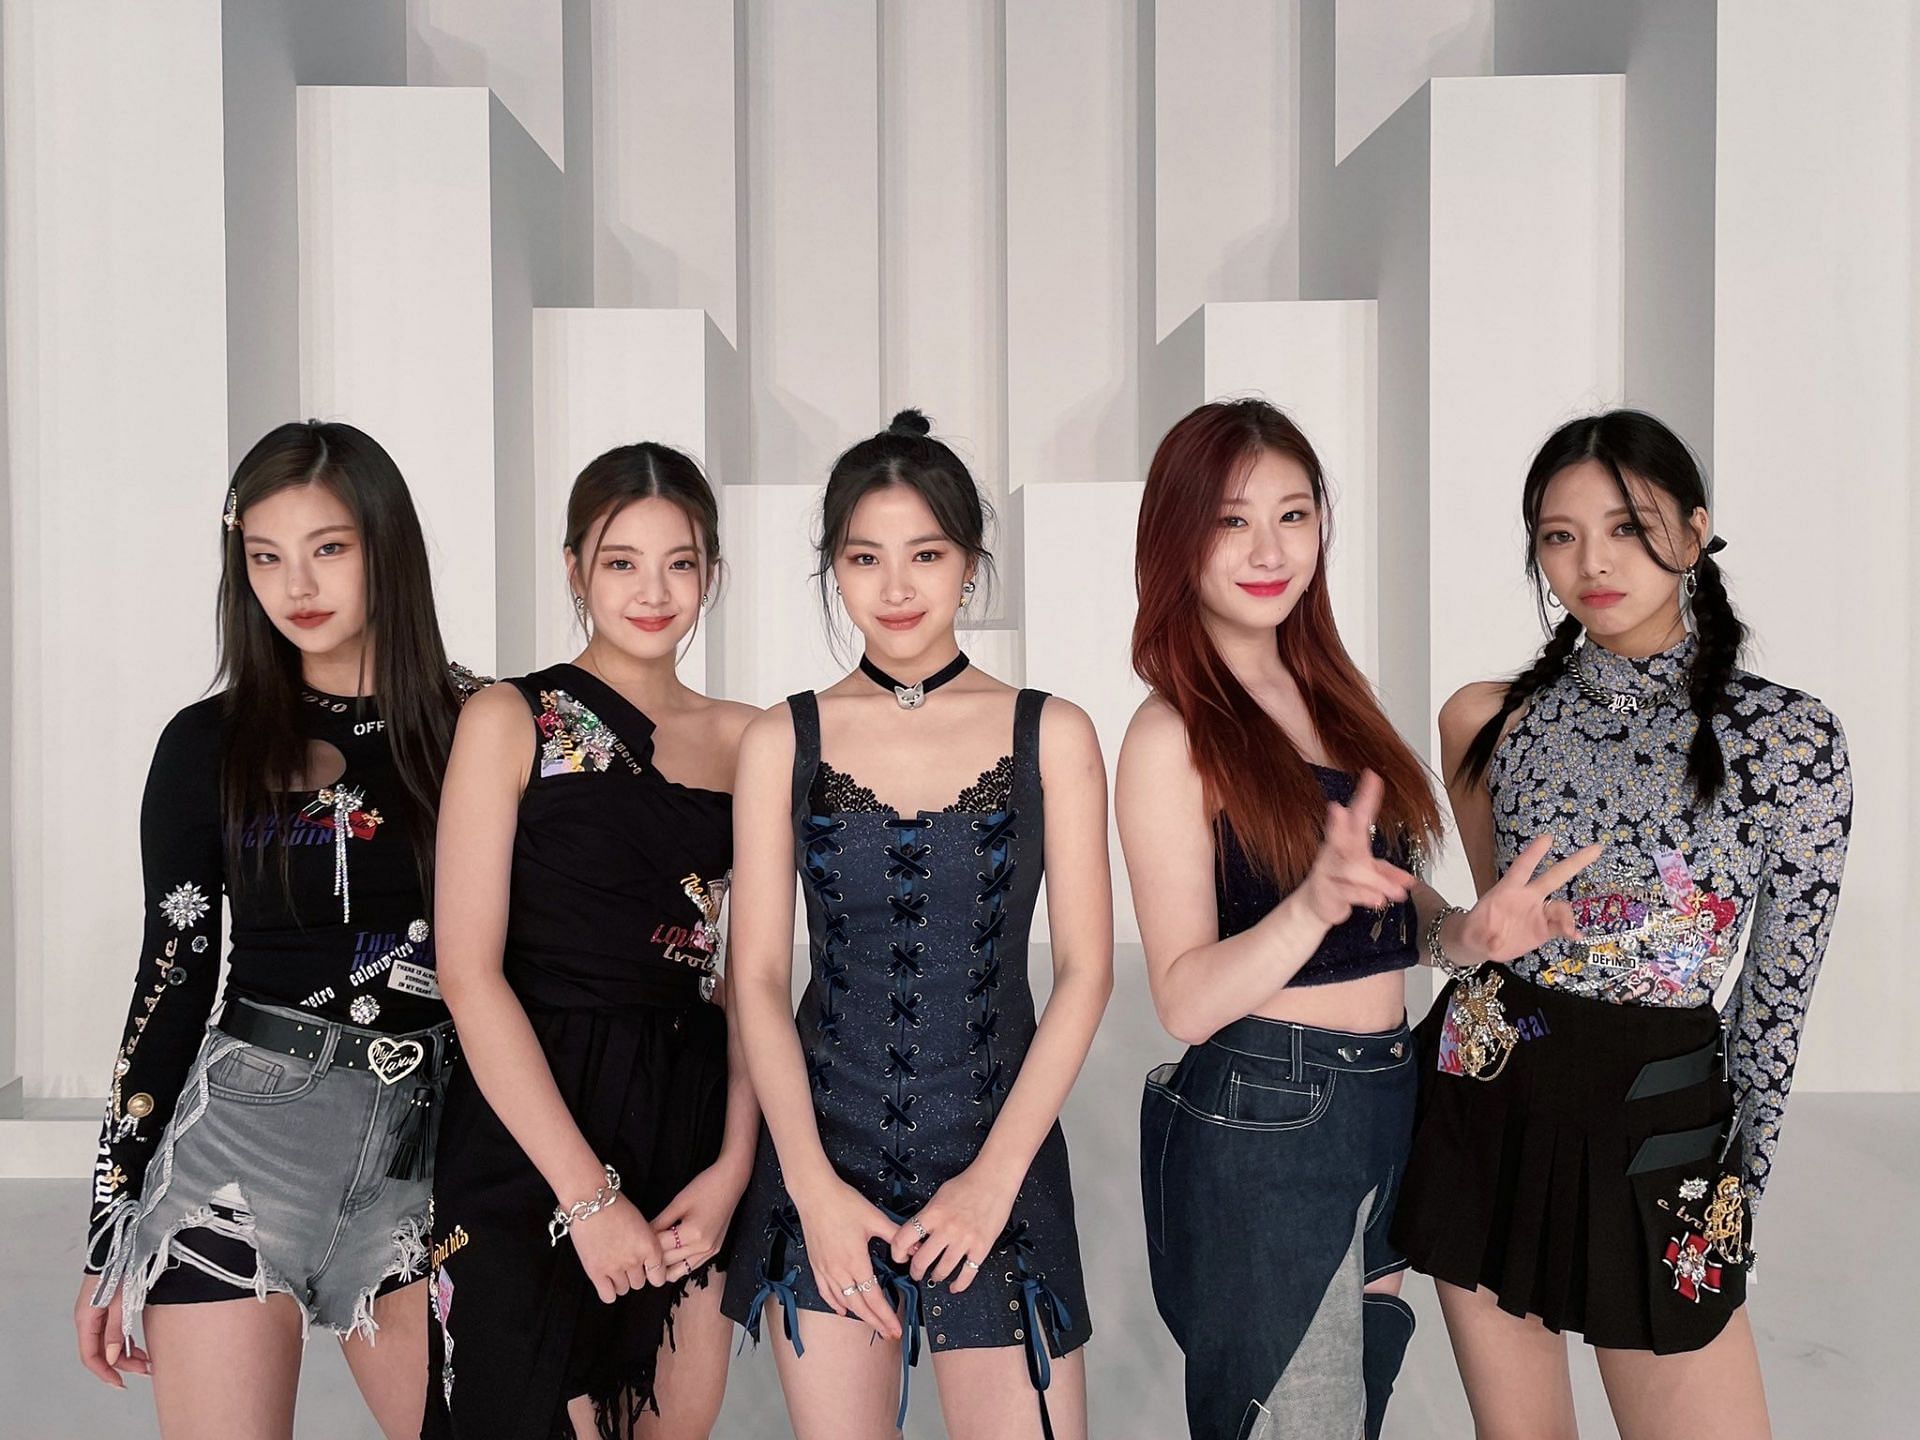 ITZY is a 5-member group from JYP Entertainment. (Image via @ITZYofficial/Twitter)